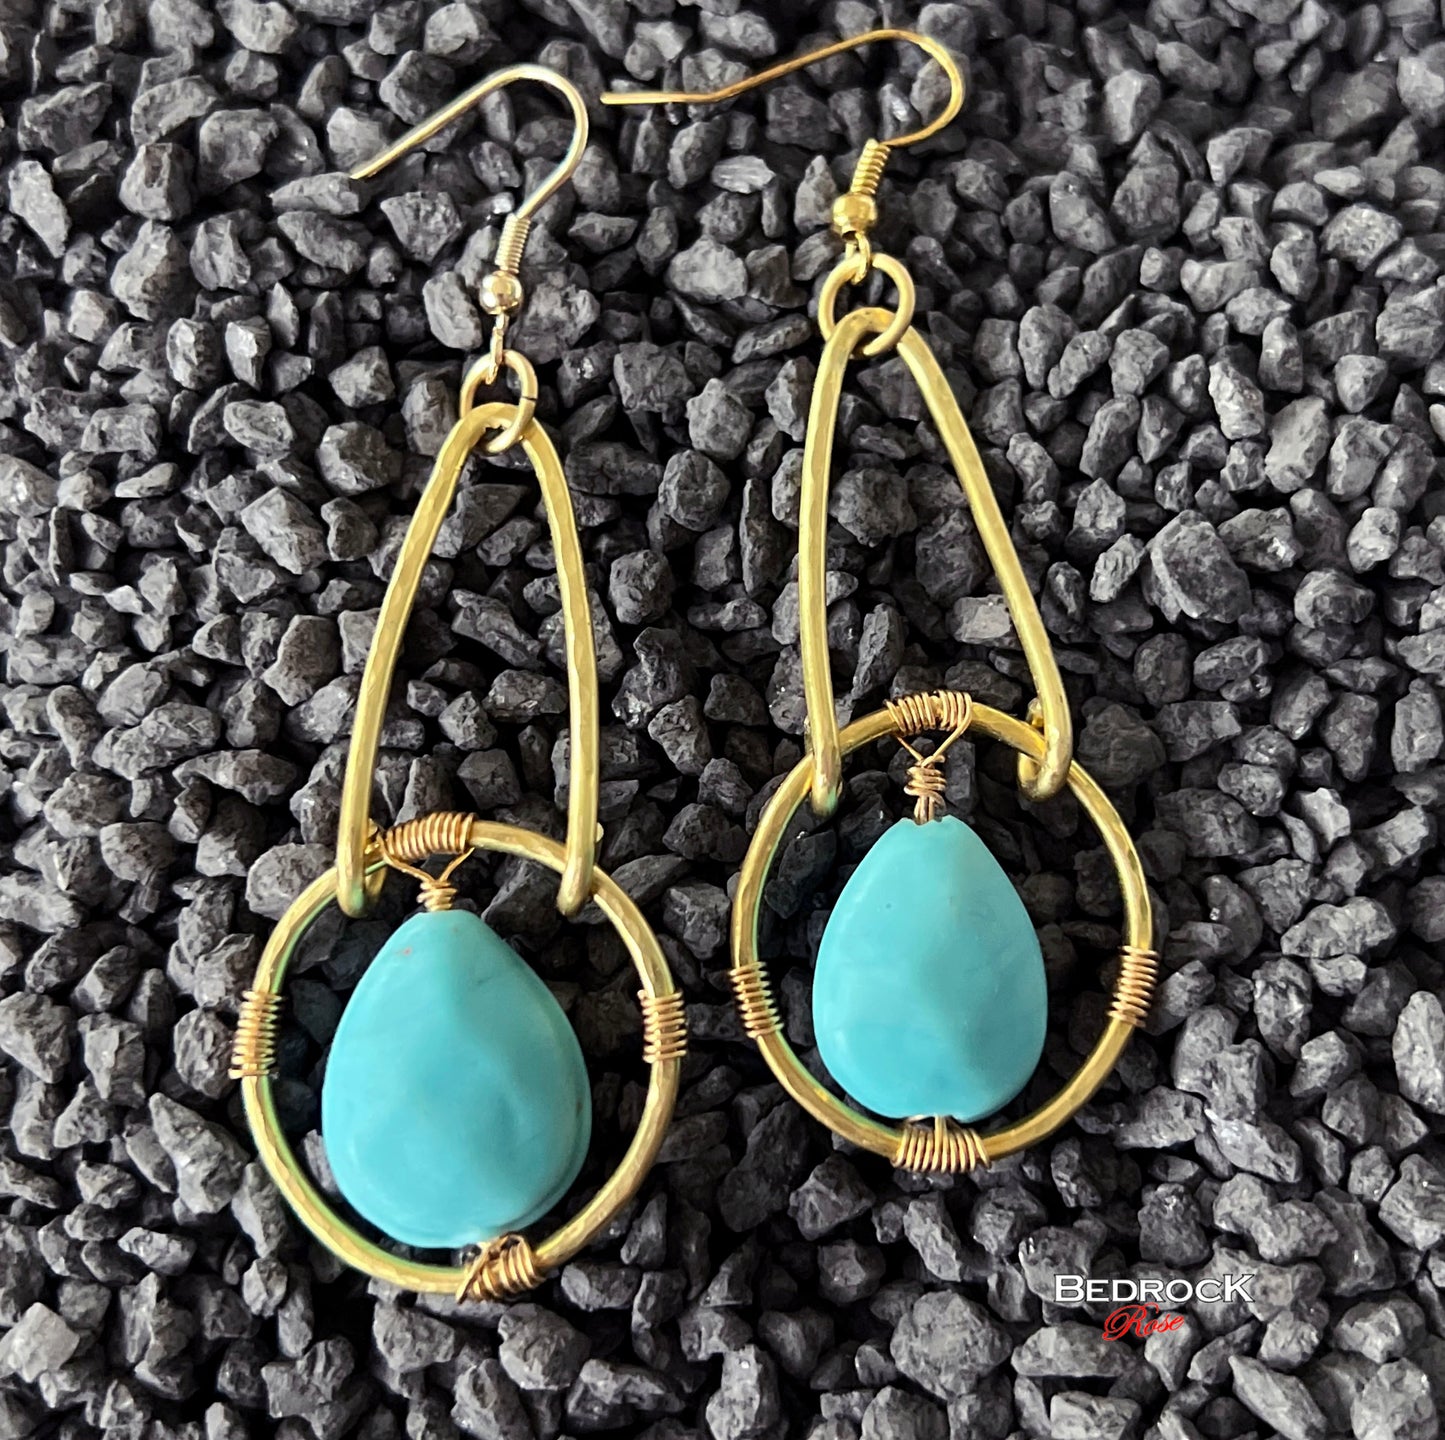 Boho Turquoise Focal Dangling Earrings, Turquoise Bead with Brass Frame Dangling Earrings, Casual Boho Turquoise Earrings, Gift for Her